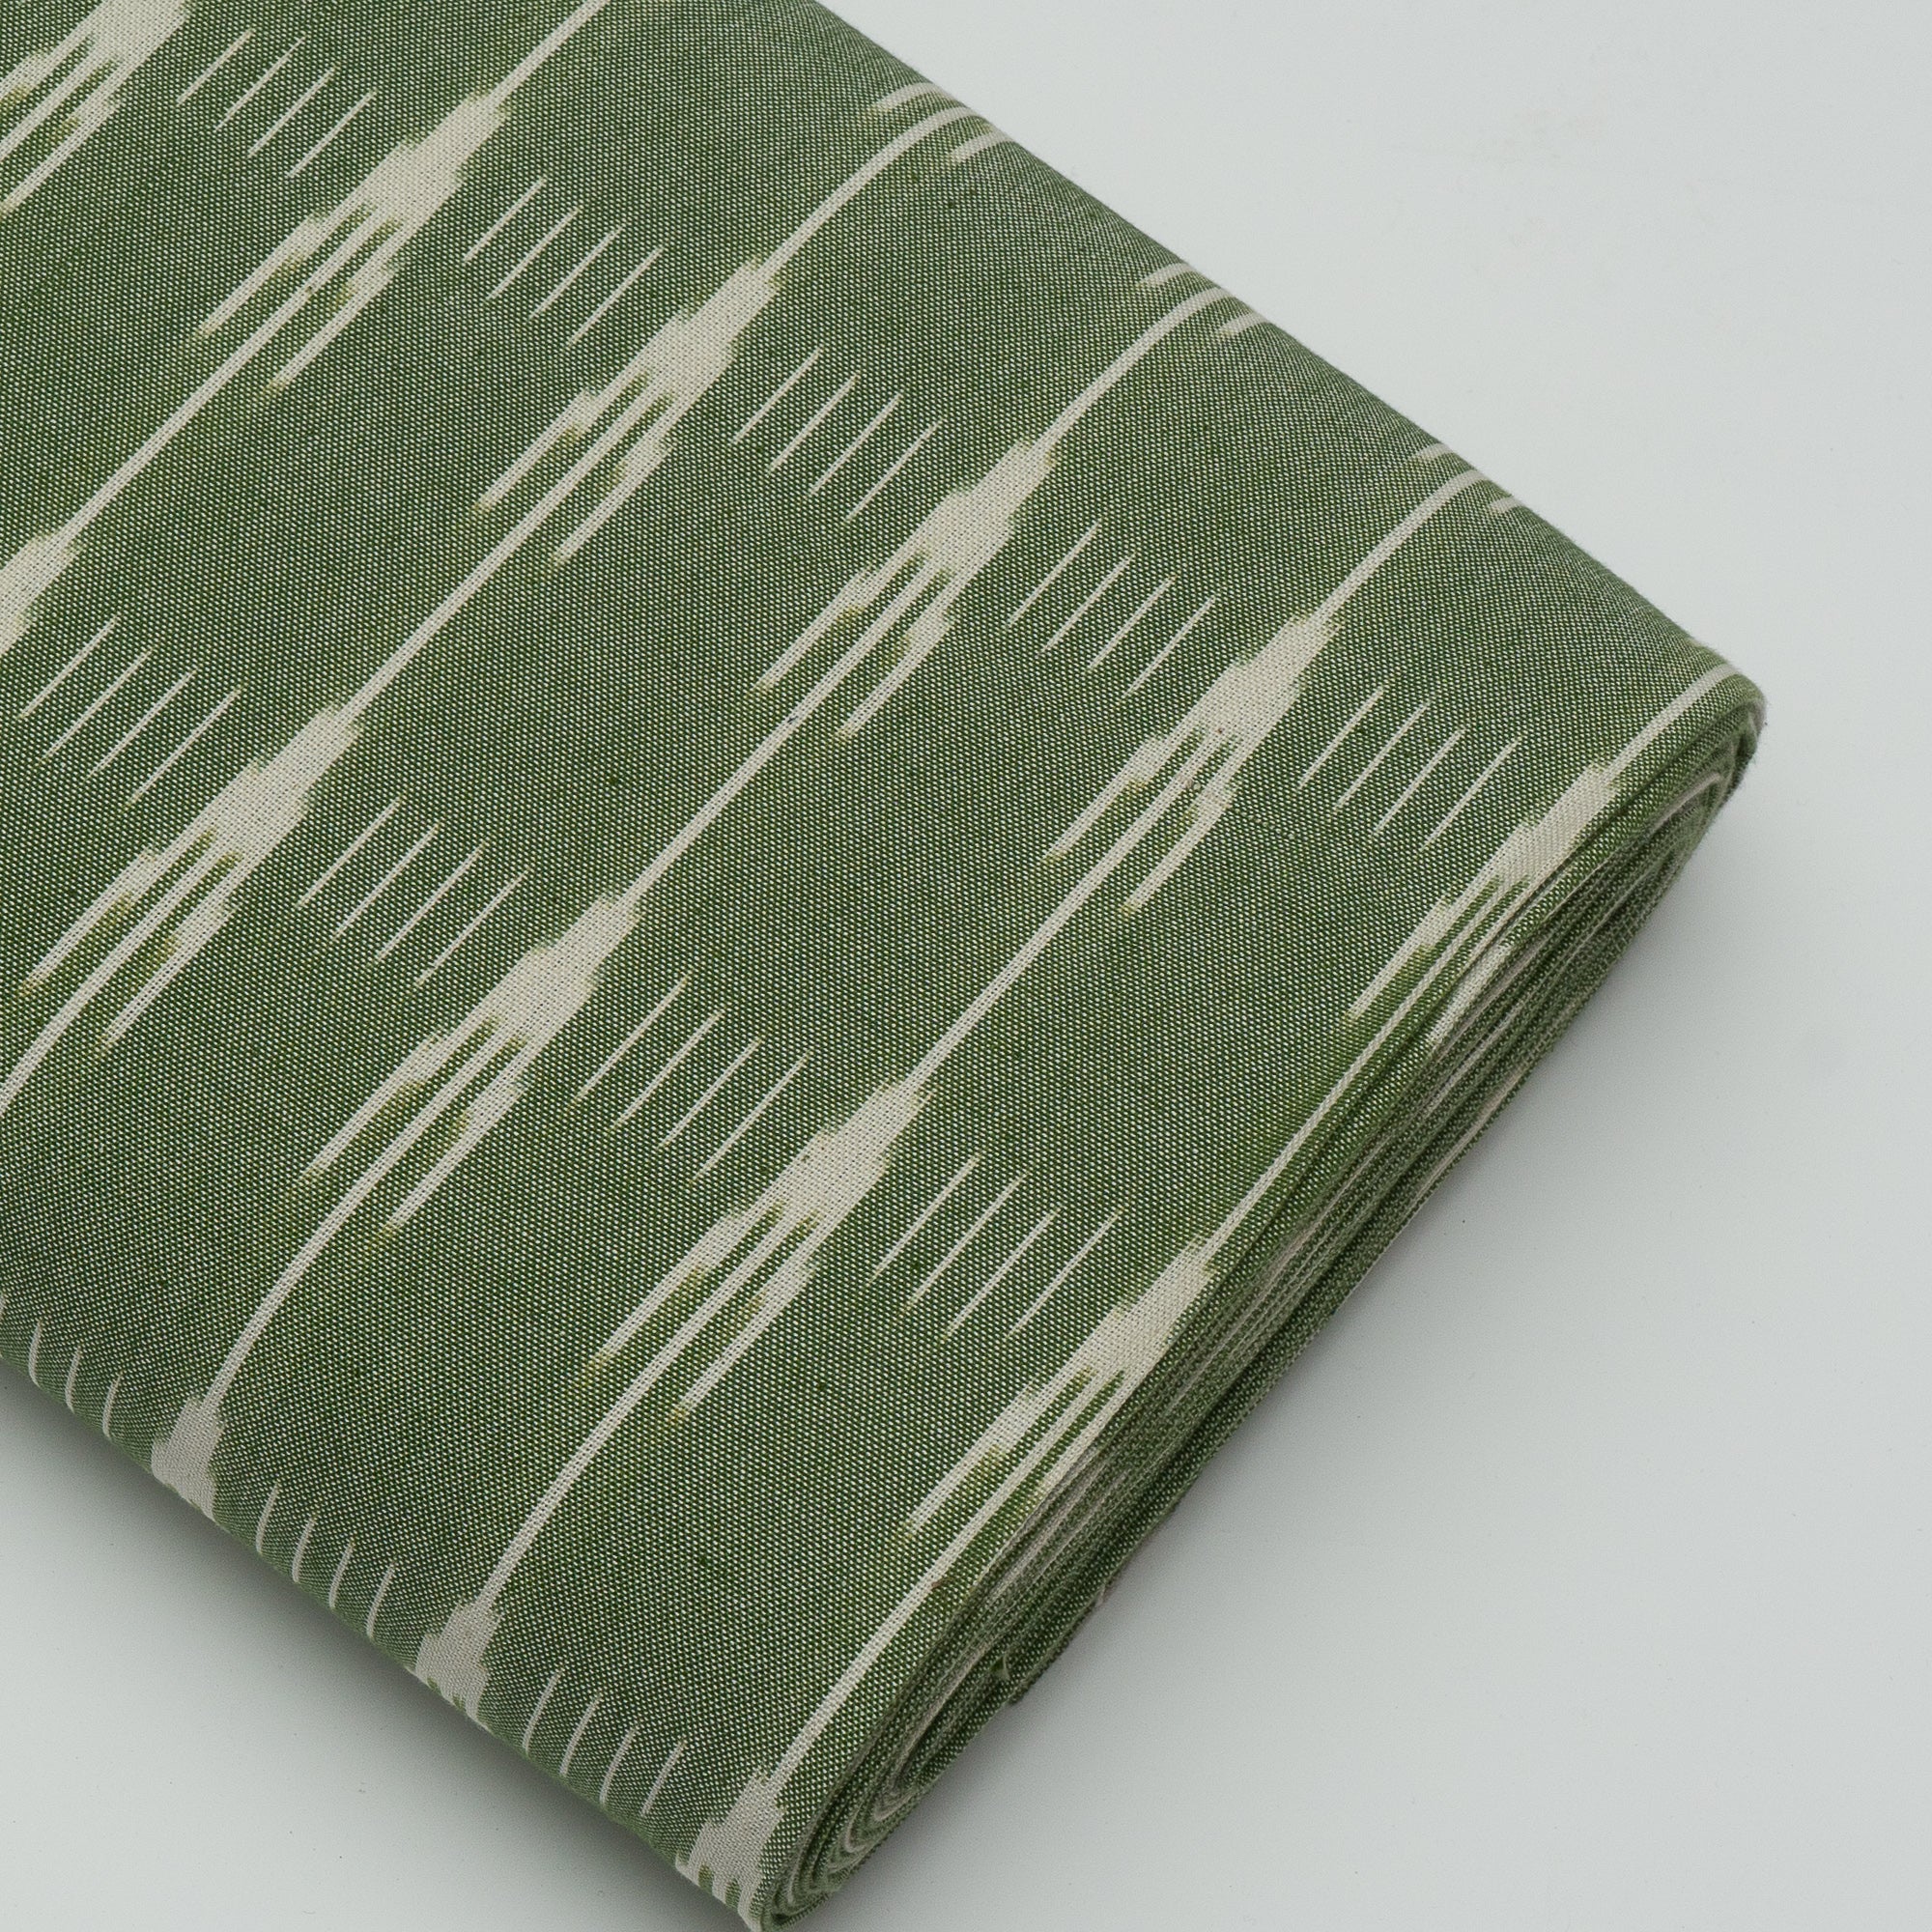 Green and White Thick Cotton Ikat